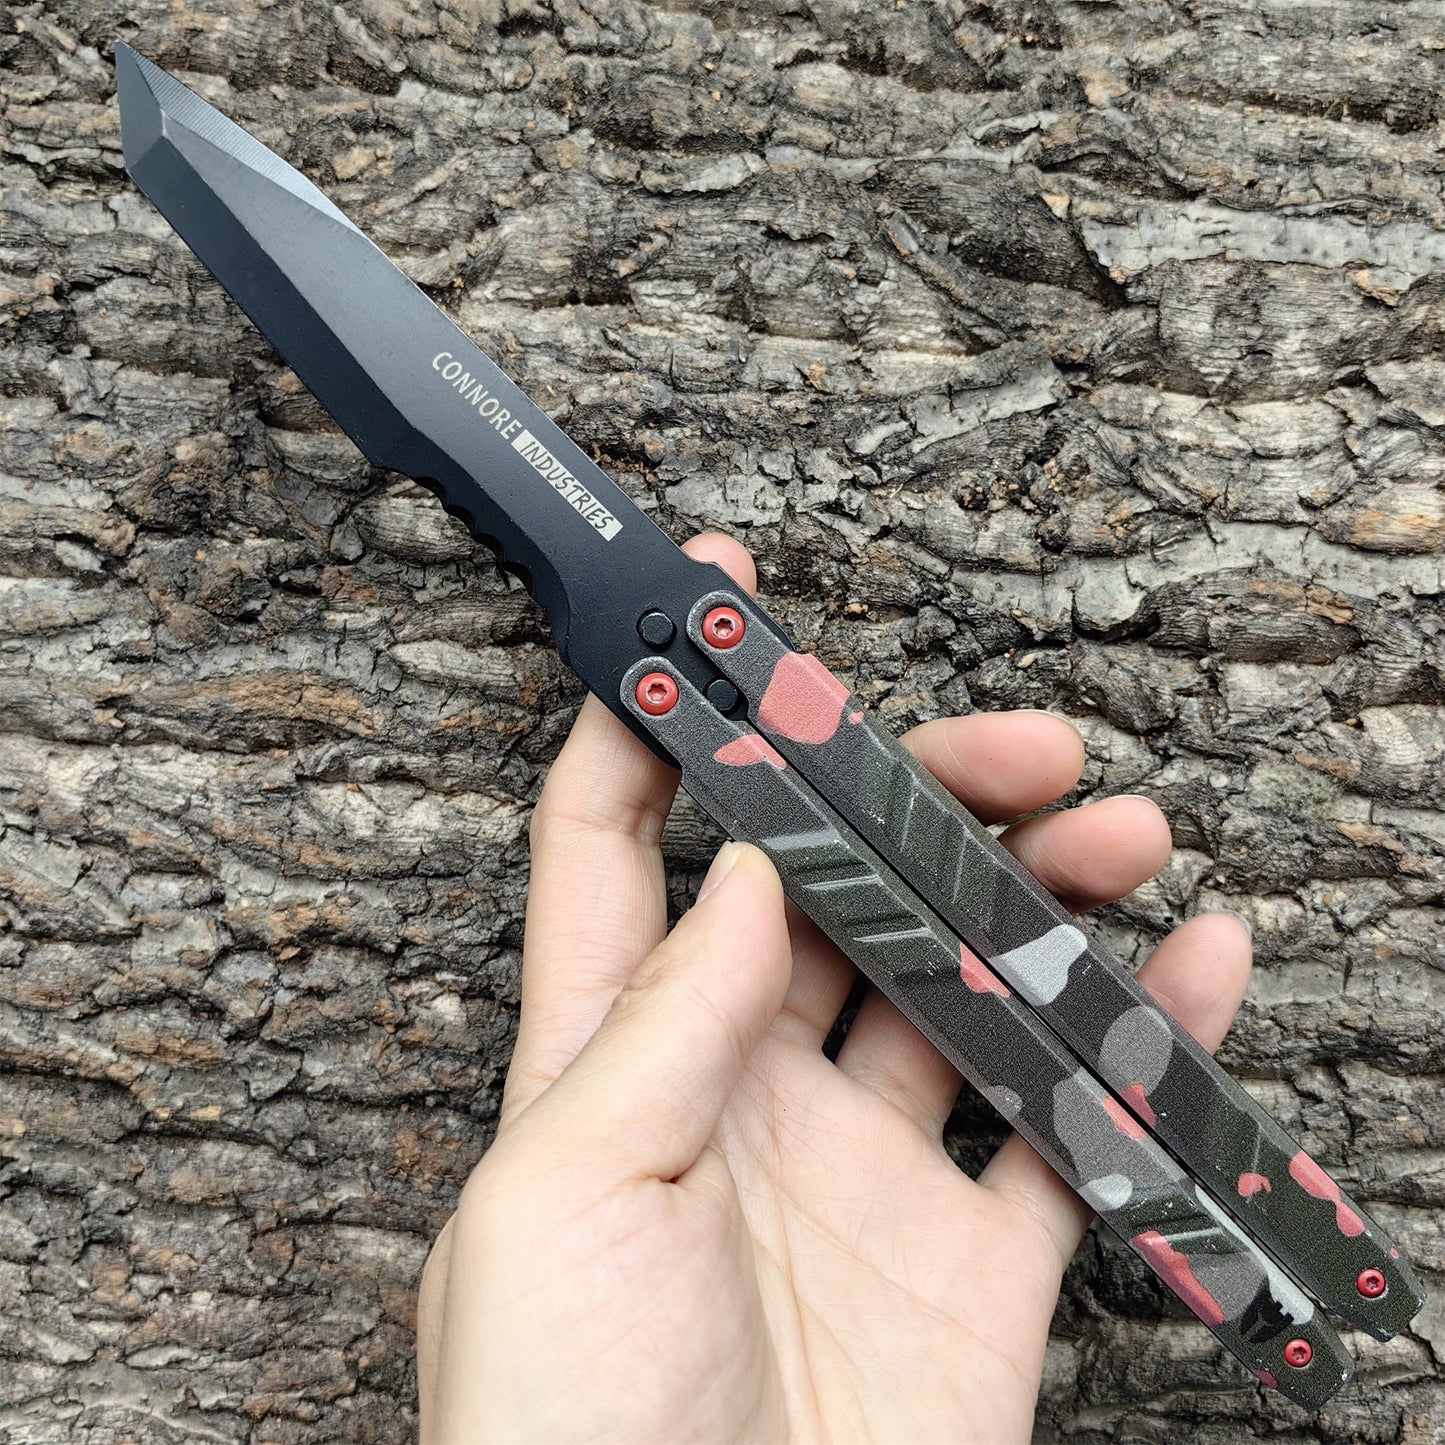 Recon Magepunk Sparkswitch Knife Champions RGX Balisong 4 In 1 Pack